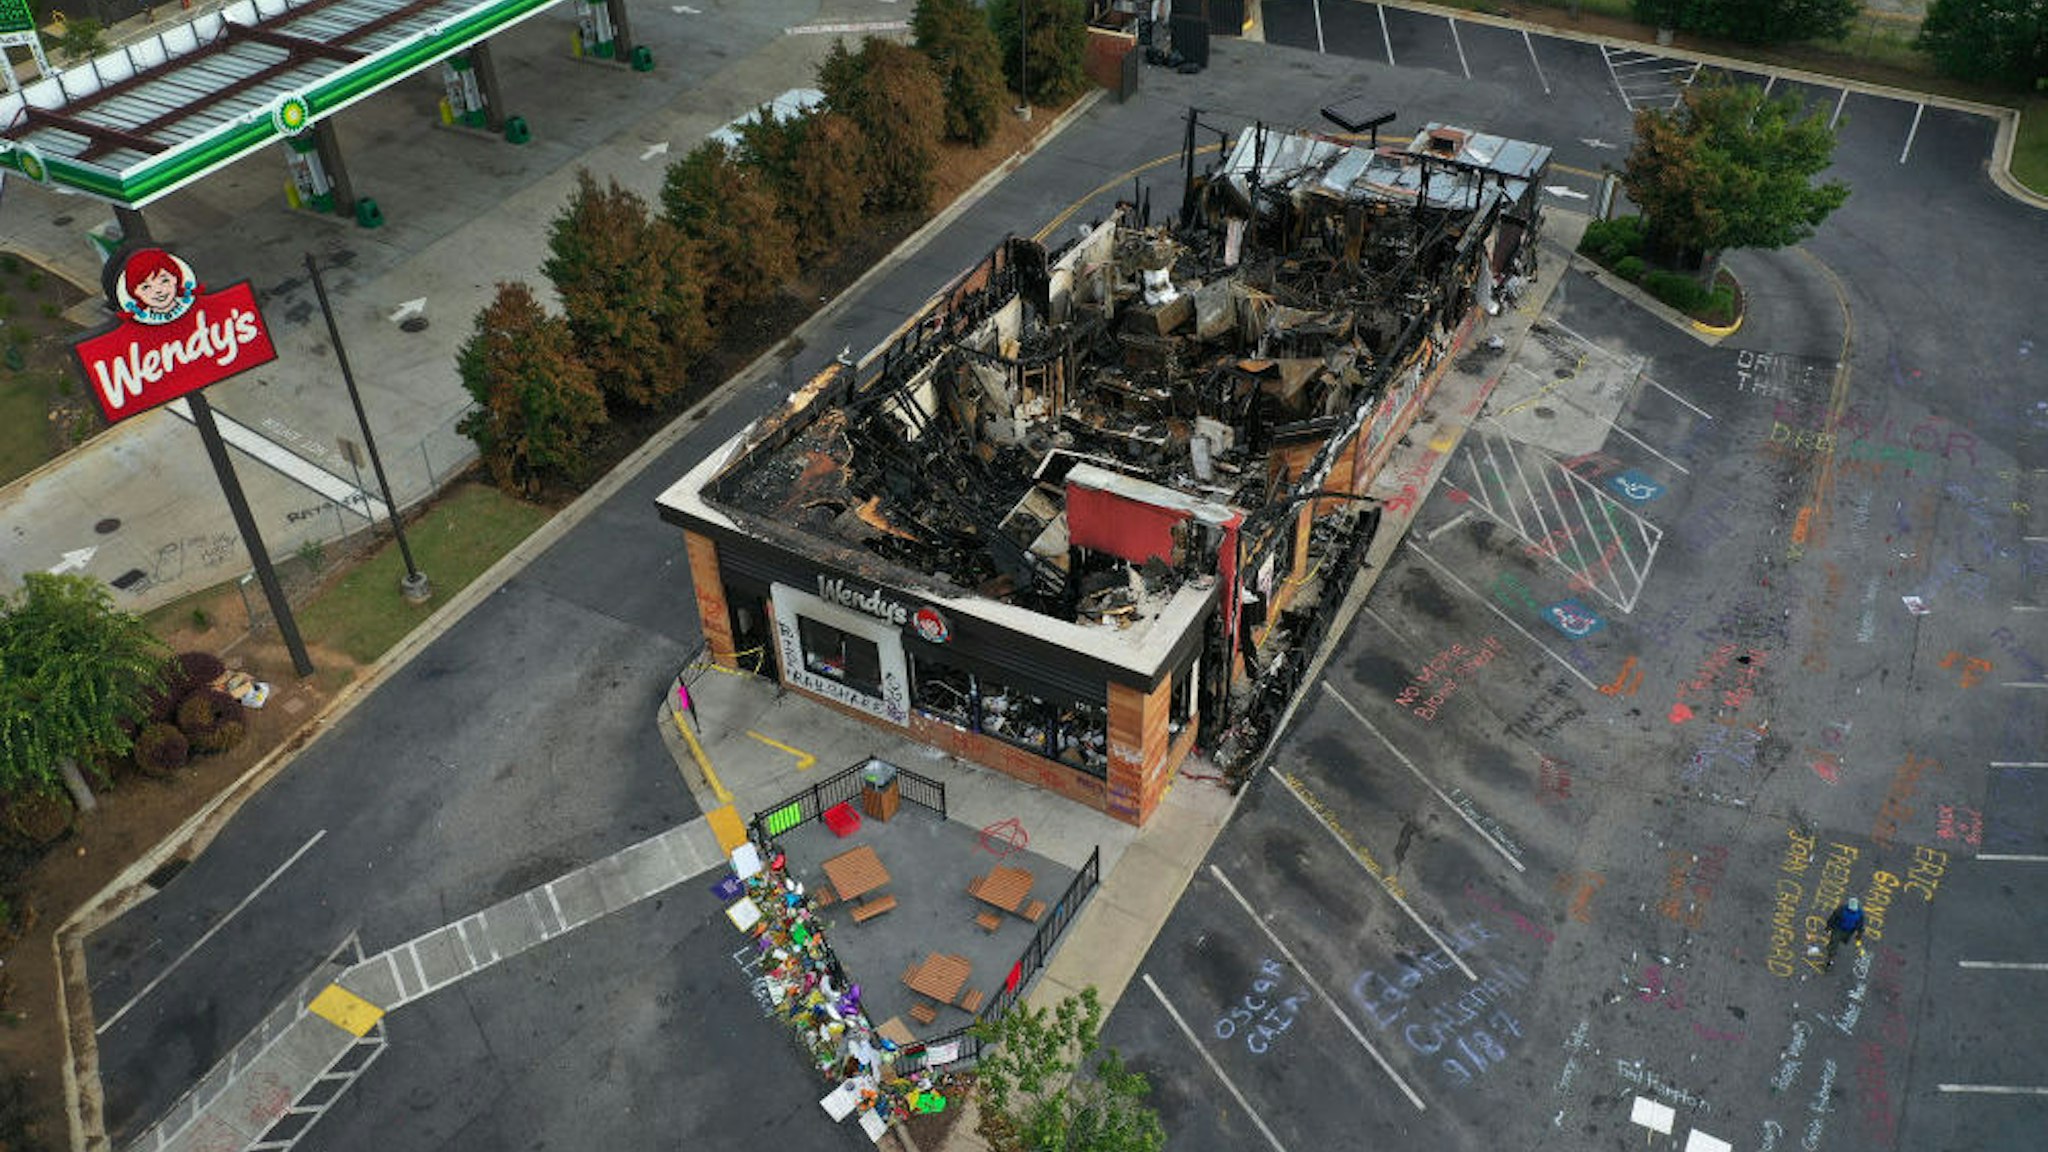 In this aerial photo, the Wendy's restaurant that was set on fire by demonstrators after Rayshard Brooks was killed is seen on June 17, 2020 in Atlanta, Georgia. The site has become a place of remembrance for Mr. Brooks, who was killed by police while fleeing after a struggle during a field sobriety test in the Wendy's parking lot. (Photo by Joe Raedle/Getty Images)